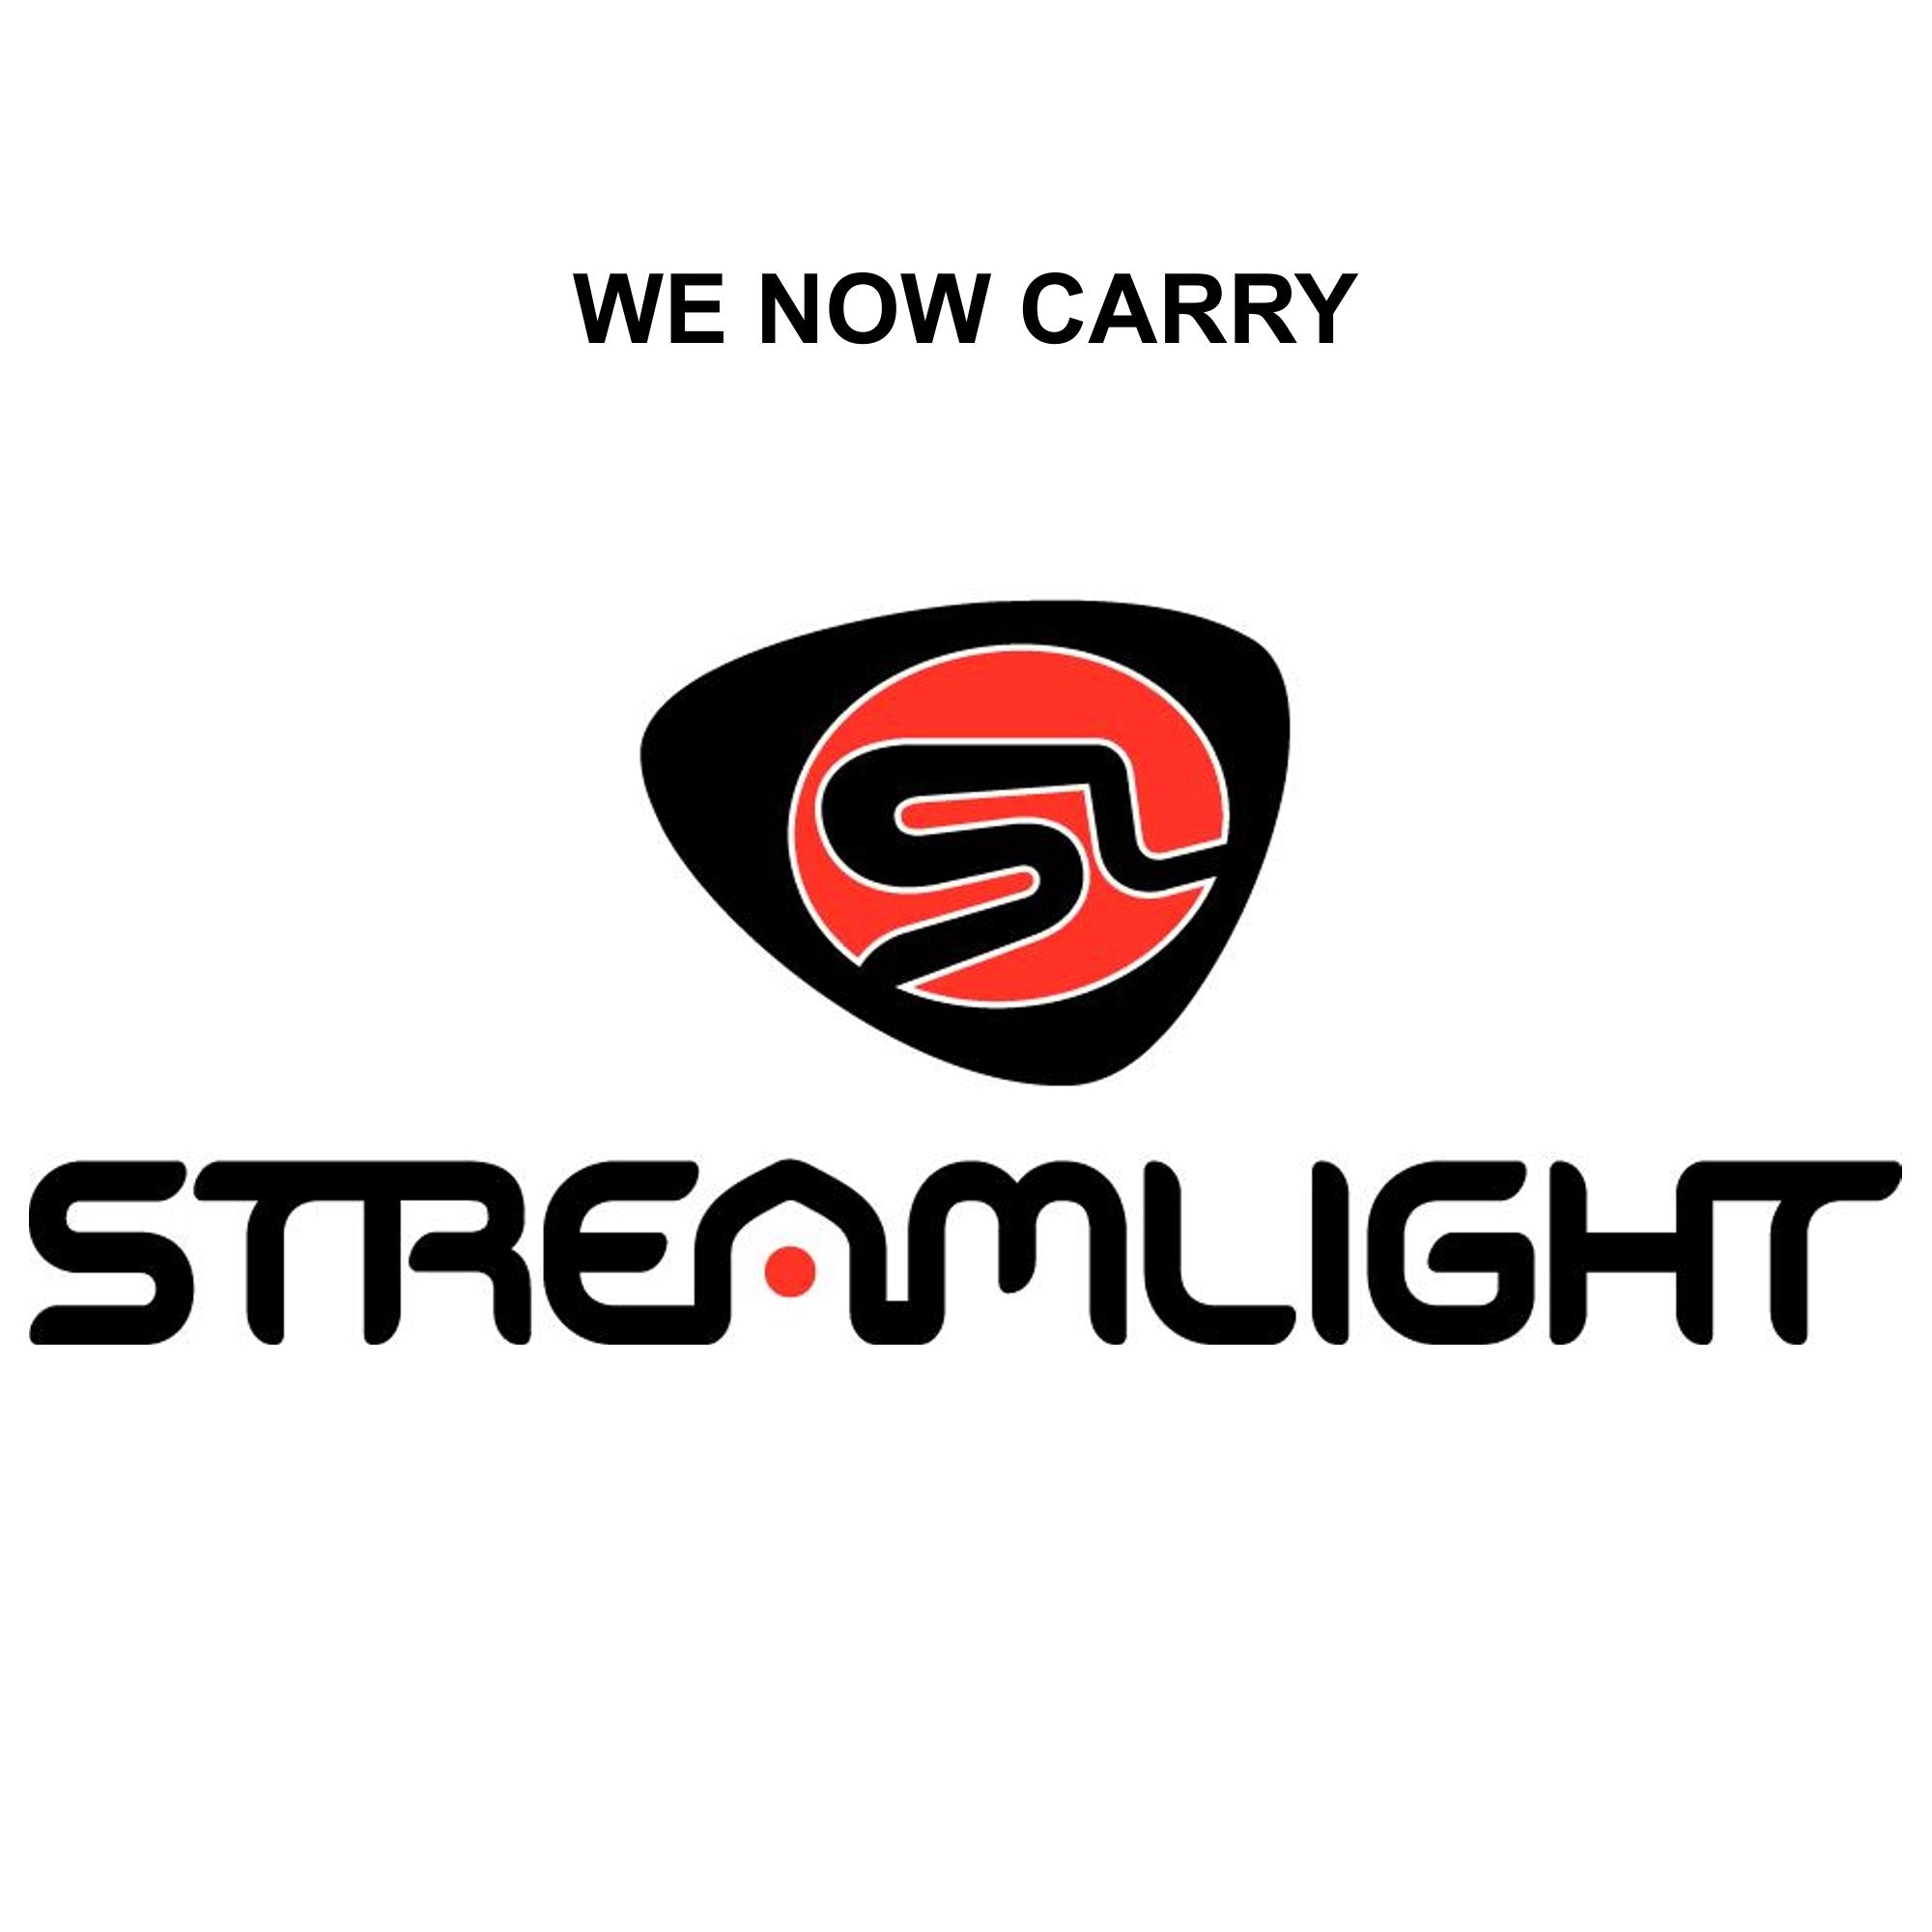 Get Lit - We Now Carry Streamlight Tactical Flashlights and Weaponlights